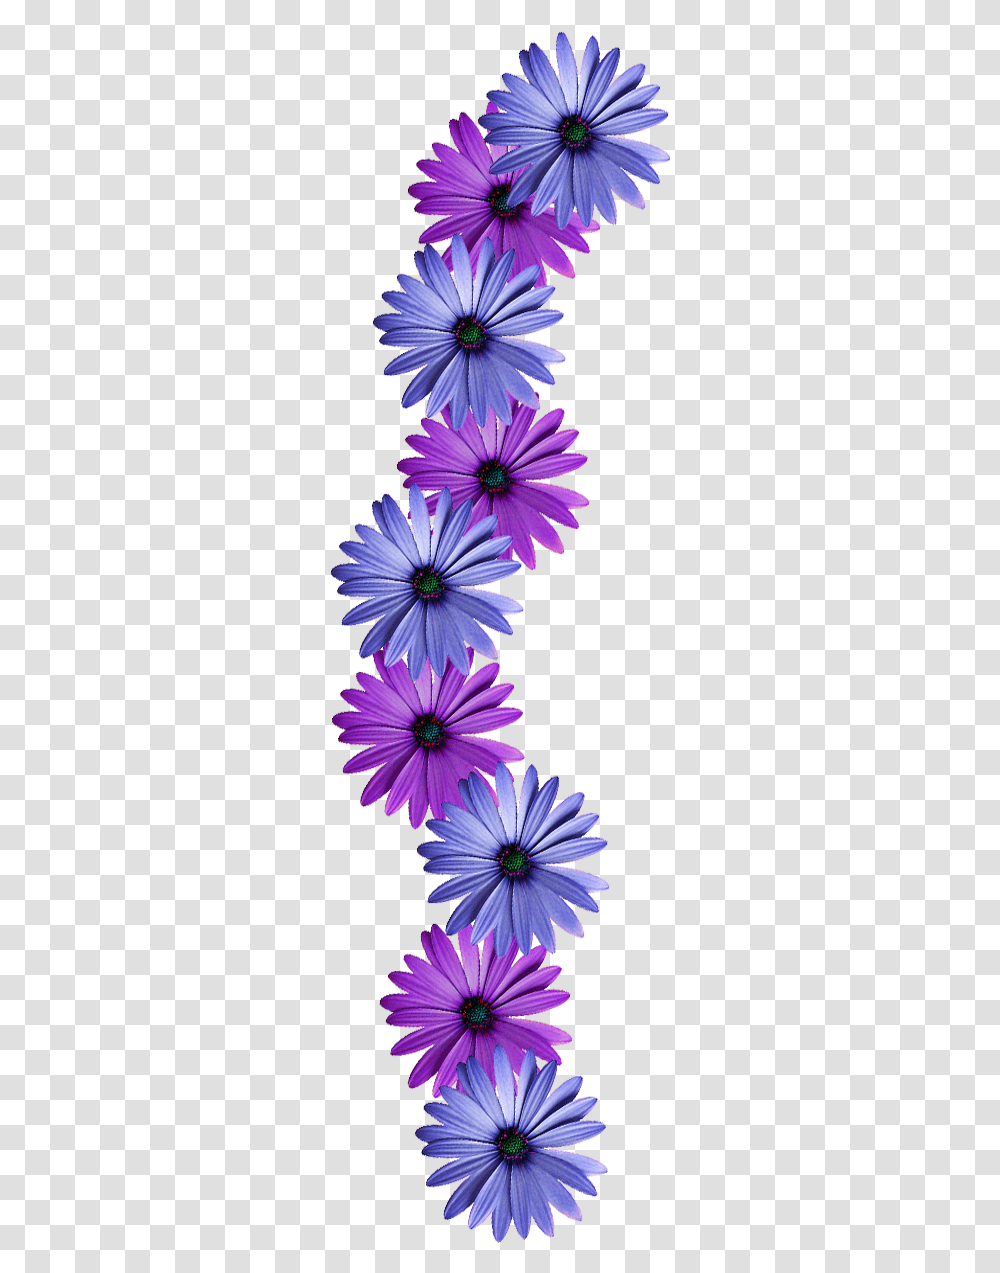 Thumb Image Flowers Vine, Plant, Daisy, Daisies, Blossom Transparent Png